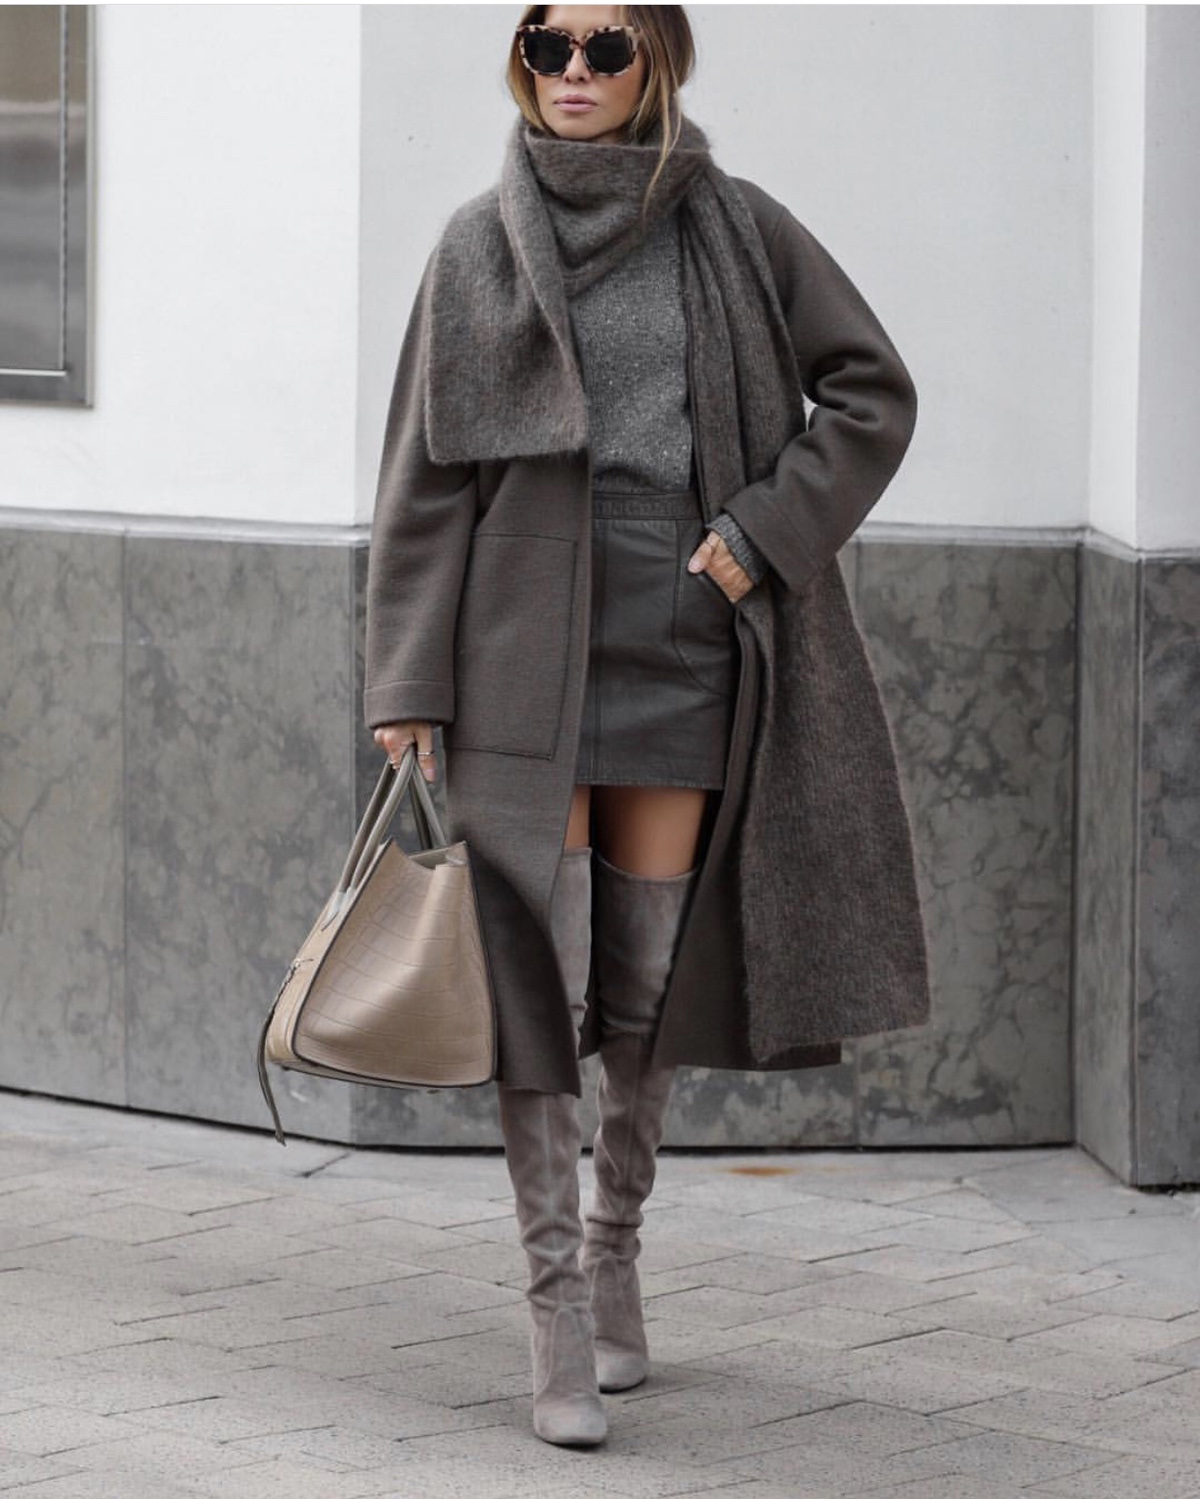 Coats Every Woman Should Own, coatigan outfit, gray stuart weitzman over the knee boots, otk boots outfit, fall outfit inspiration by lolario style | lolariostyle.com